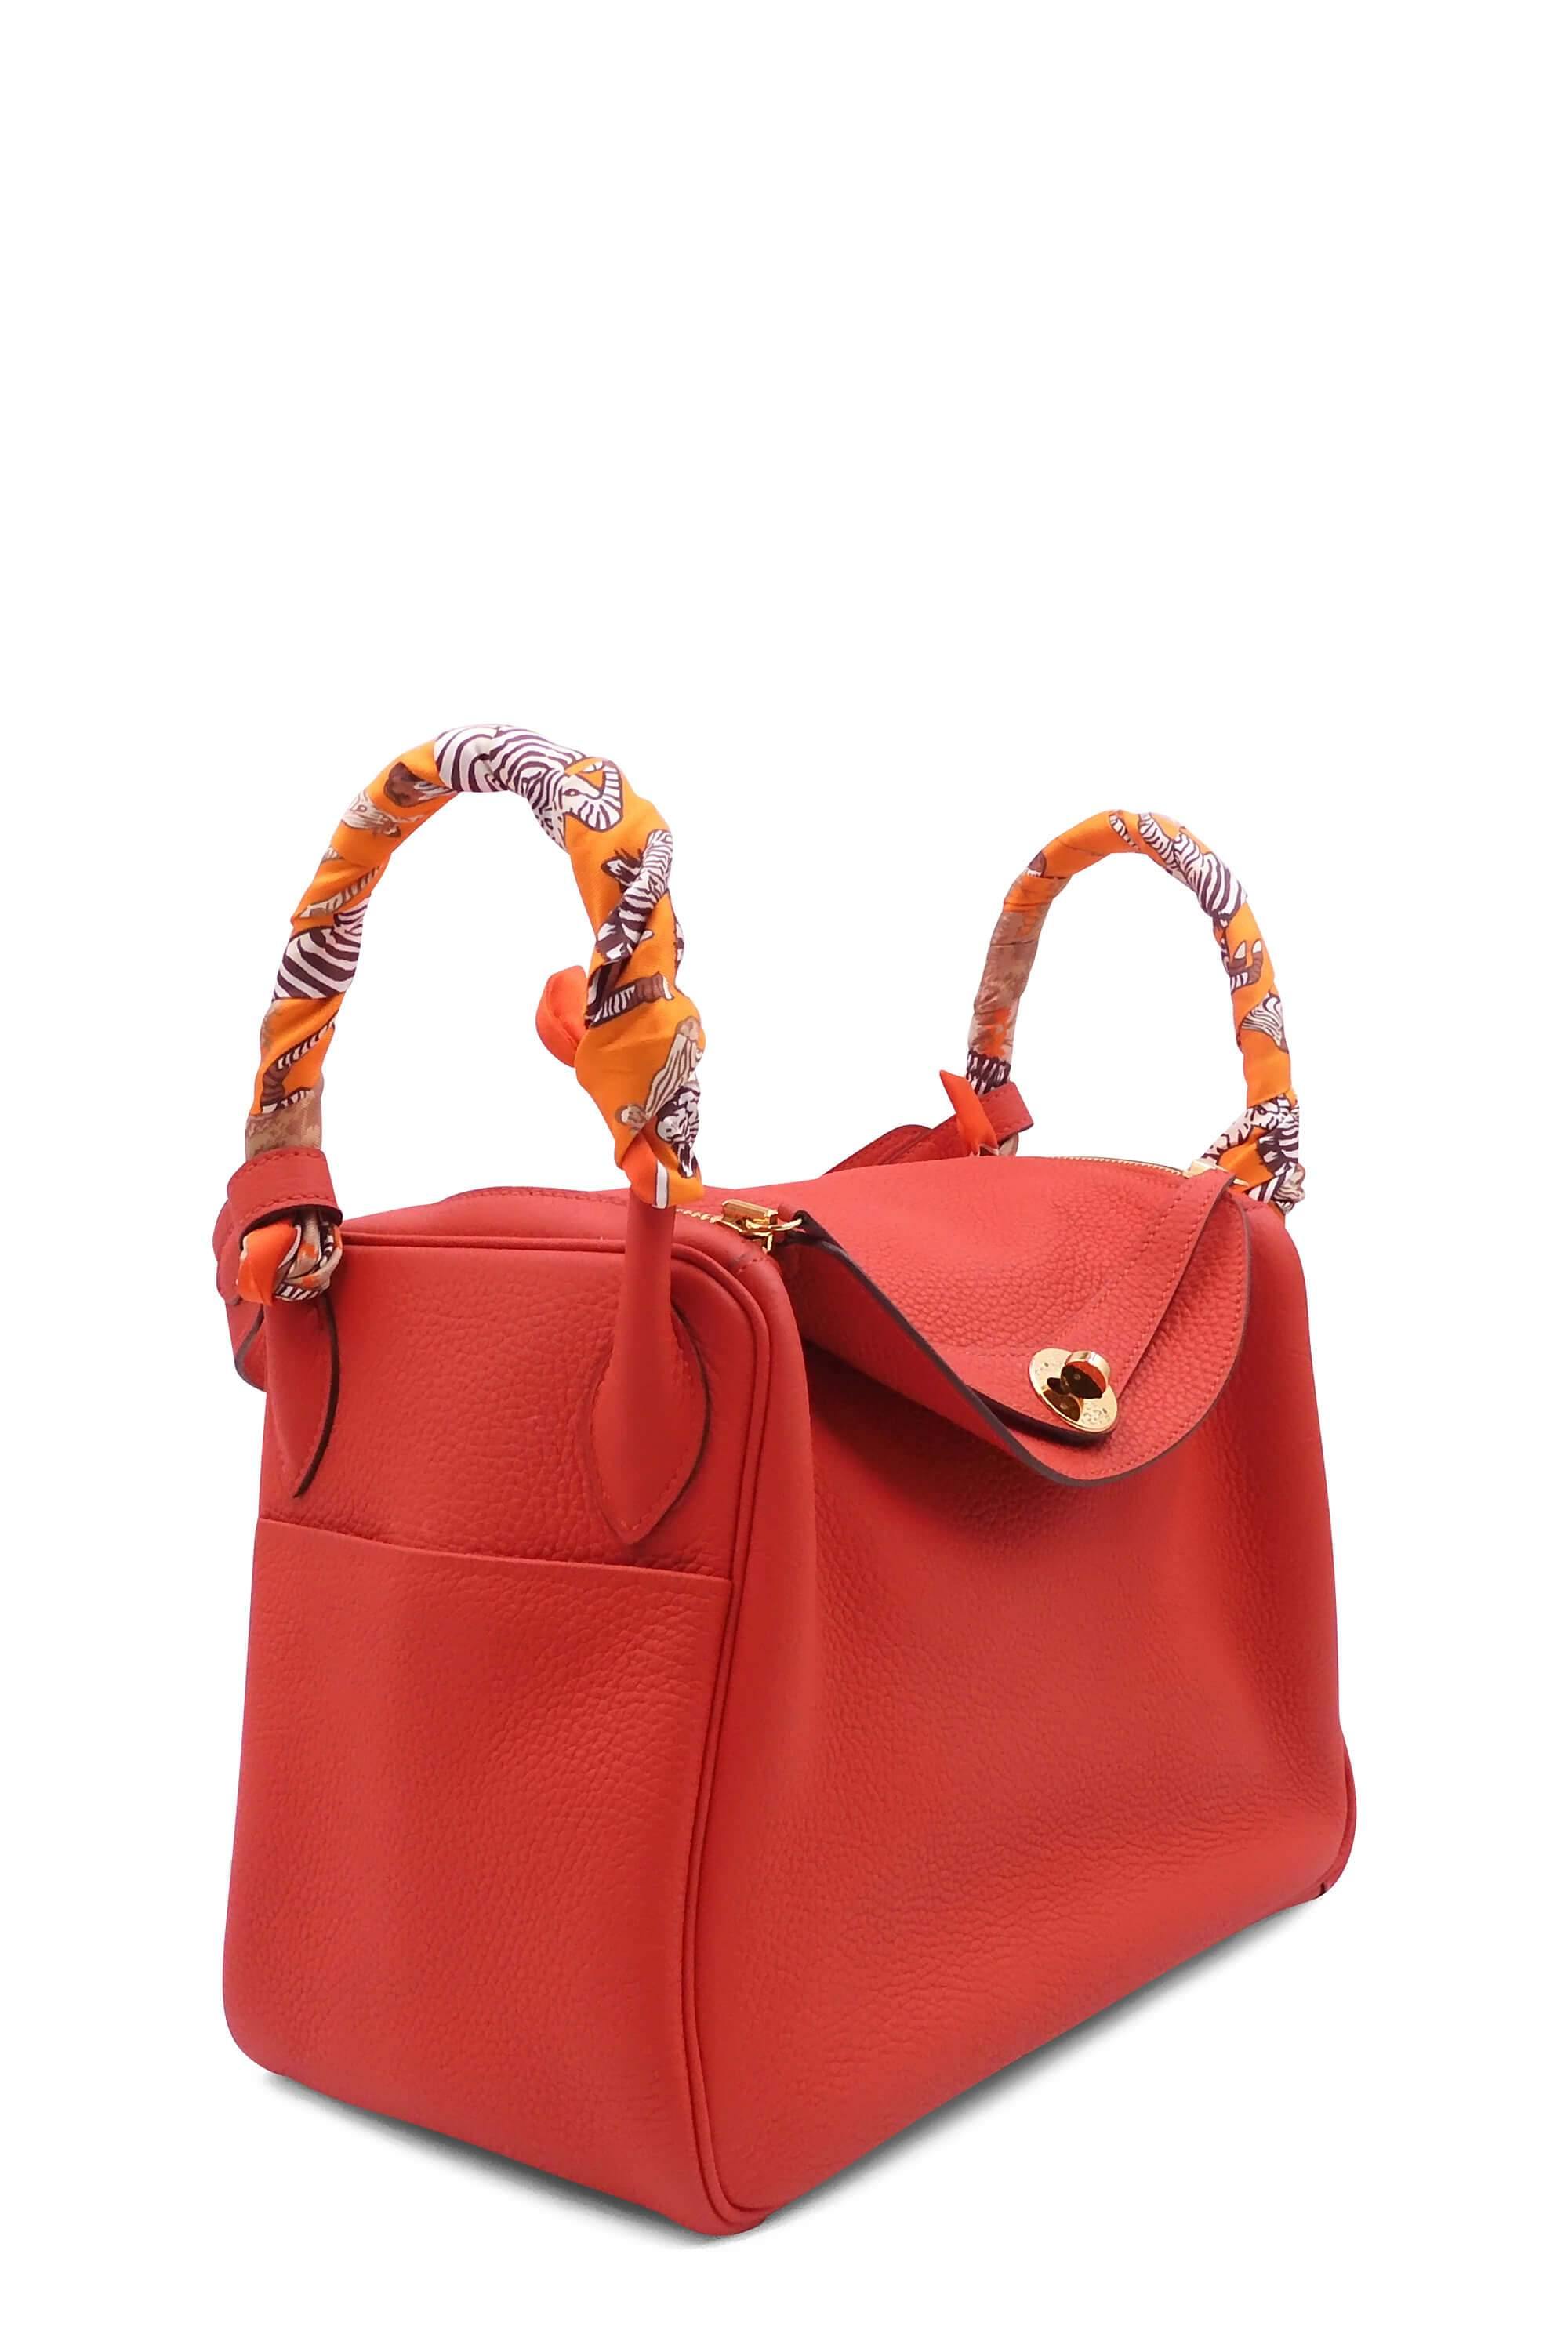 HERMES Rouge Tomate Clemence Lindy 30